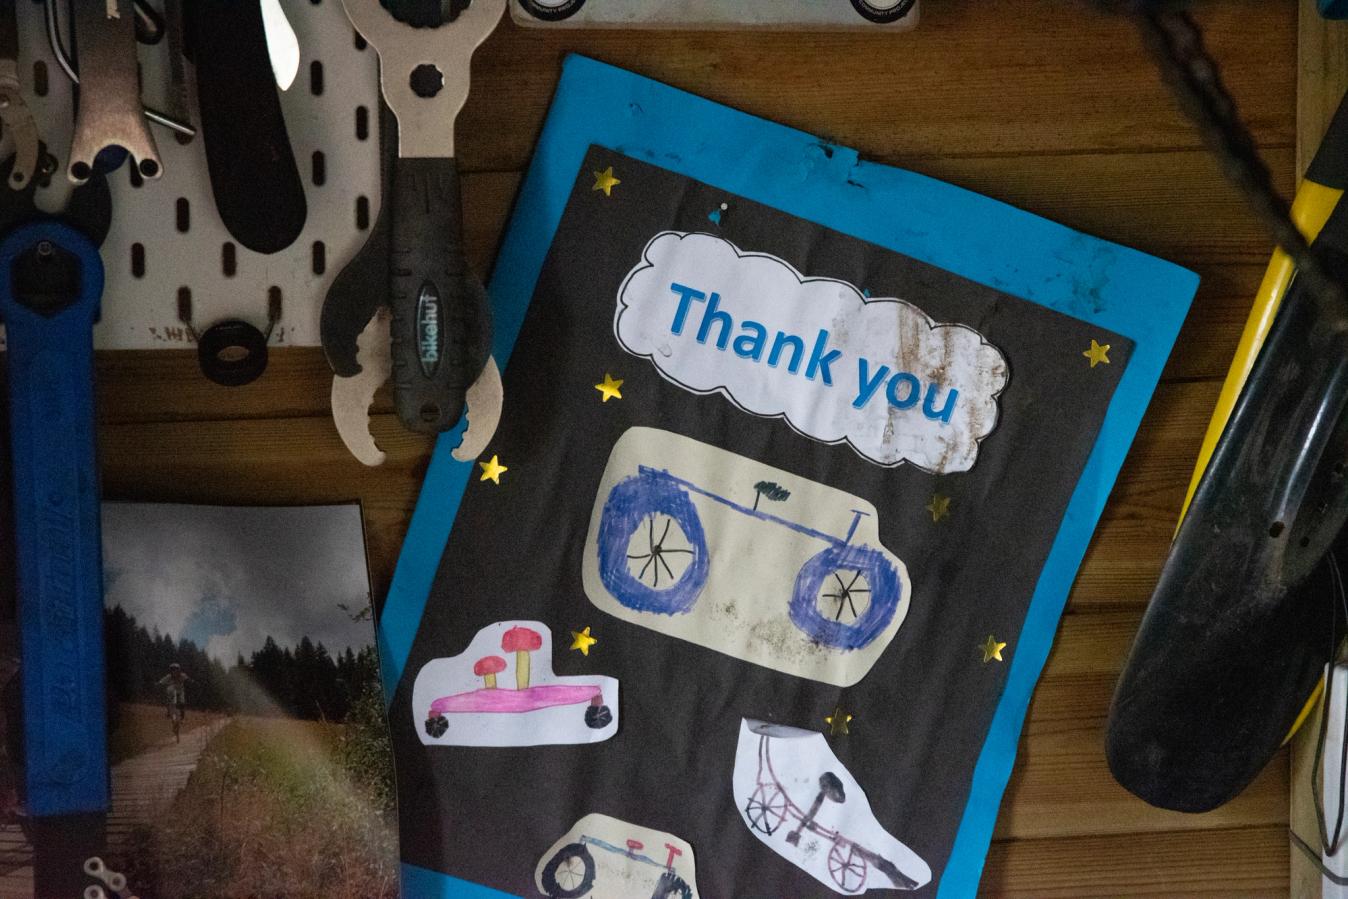 A thank you card pinned up in Mike Jones' workshop